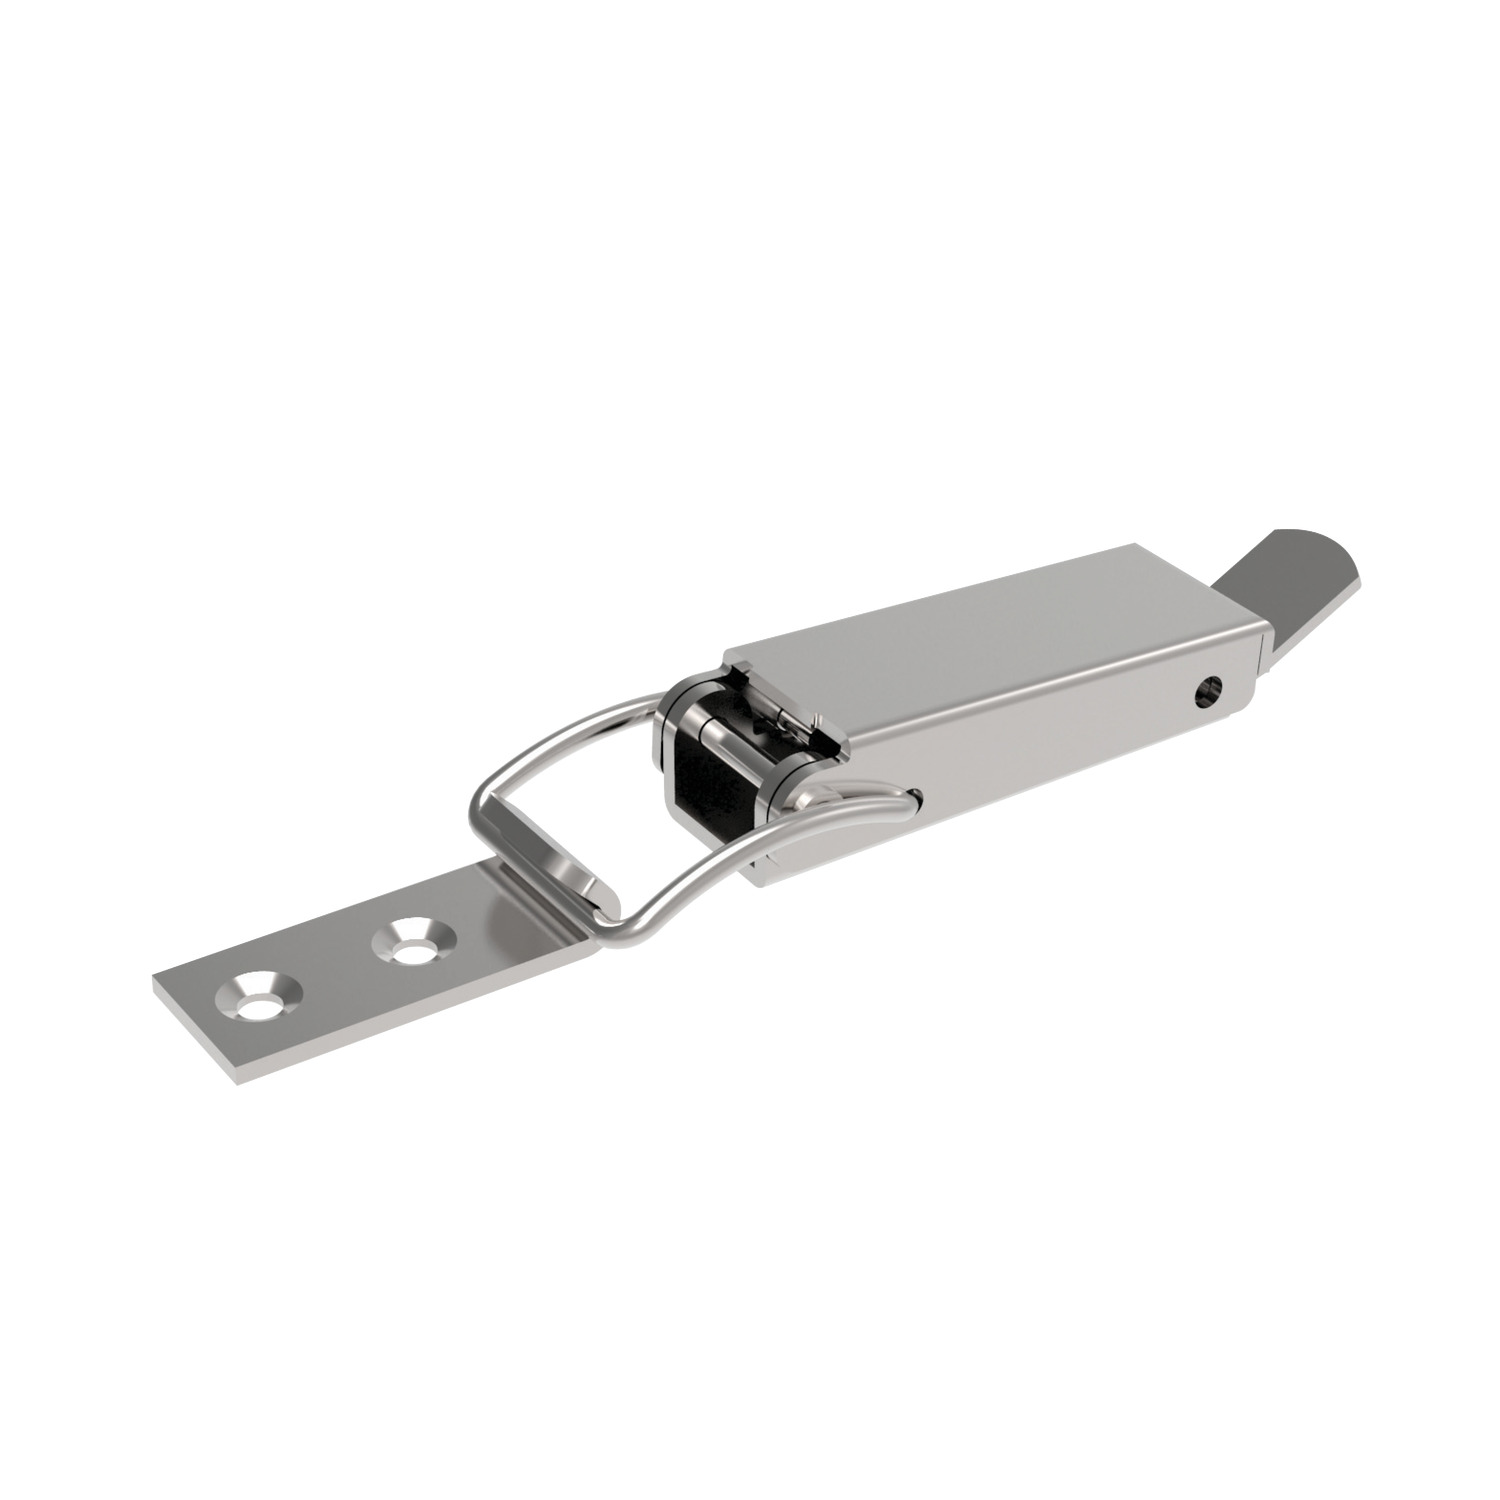 J0440.AC0030 Toggle Latches Stainless Steel - 102 - 11 - 23